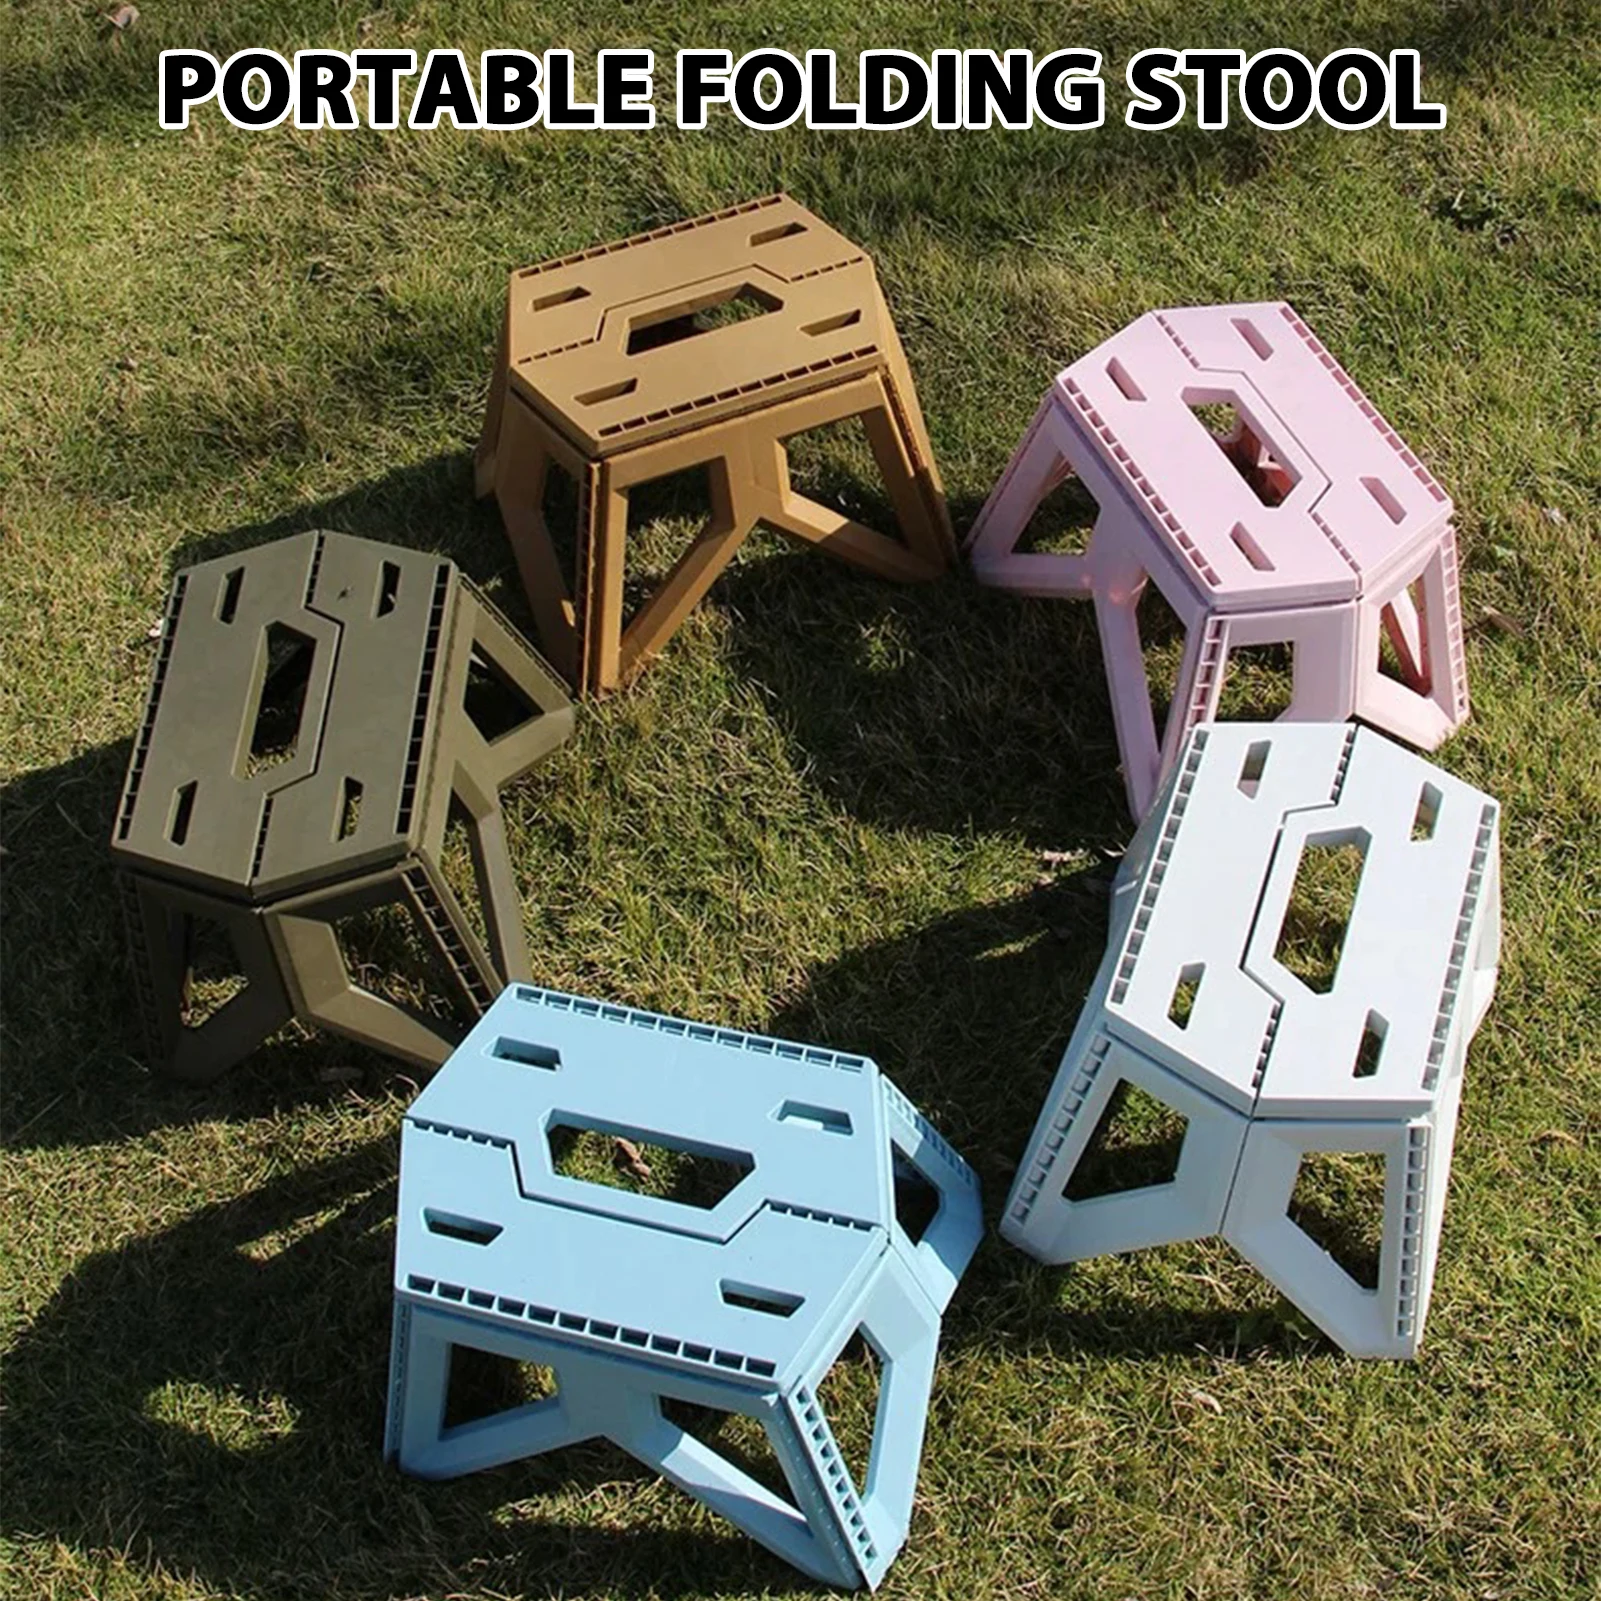 Portable Folding Stool Heavy Duty Small Bench Multipurpose Outdoor Fishing Stool Folding Chairs Home Chair For Children Adults